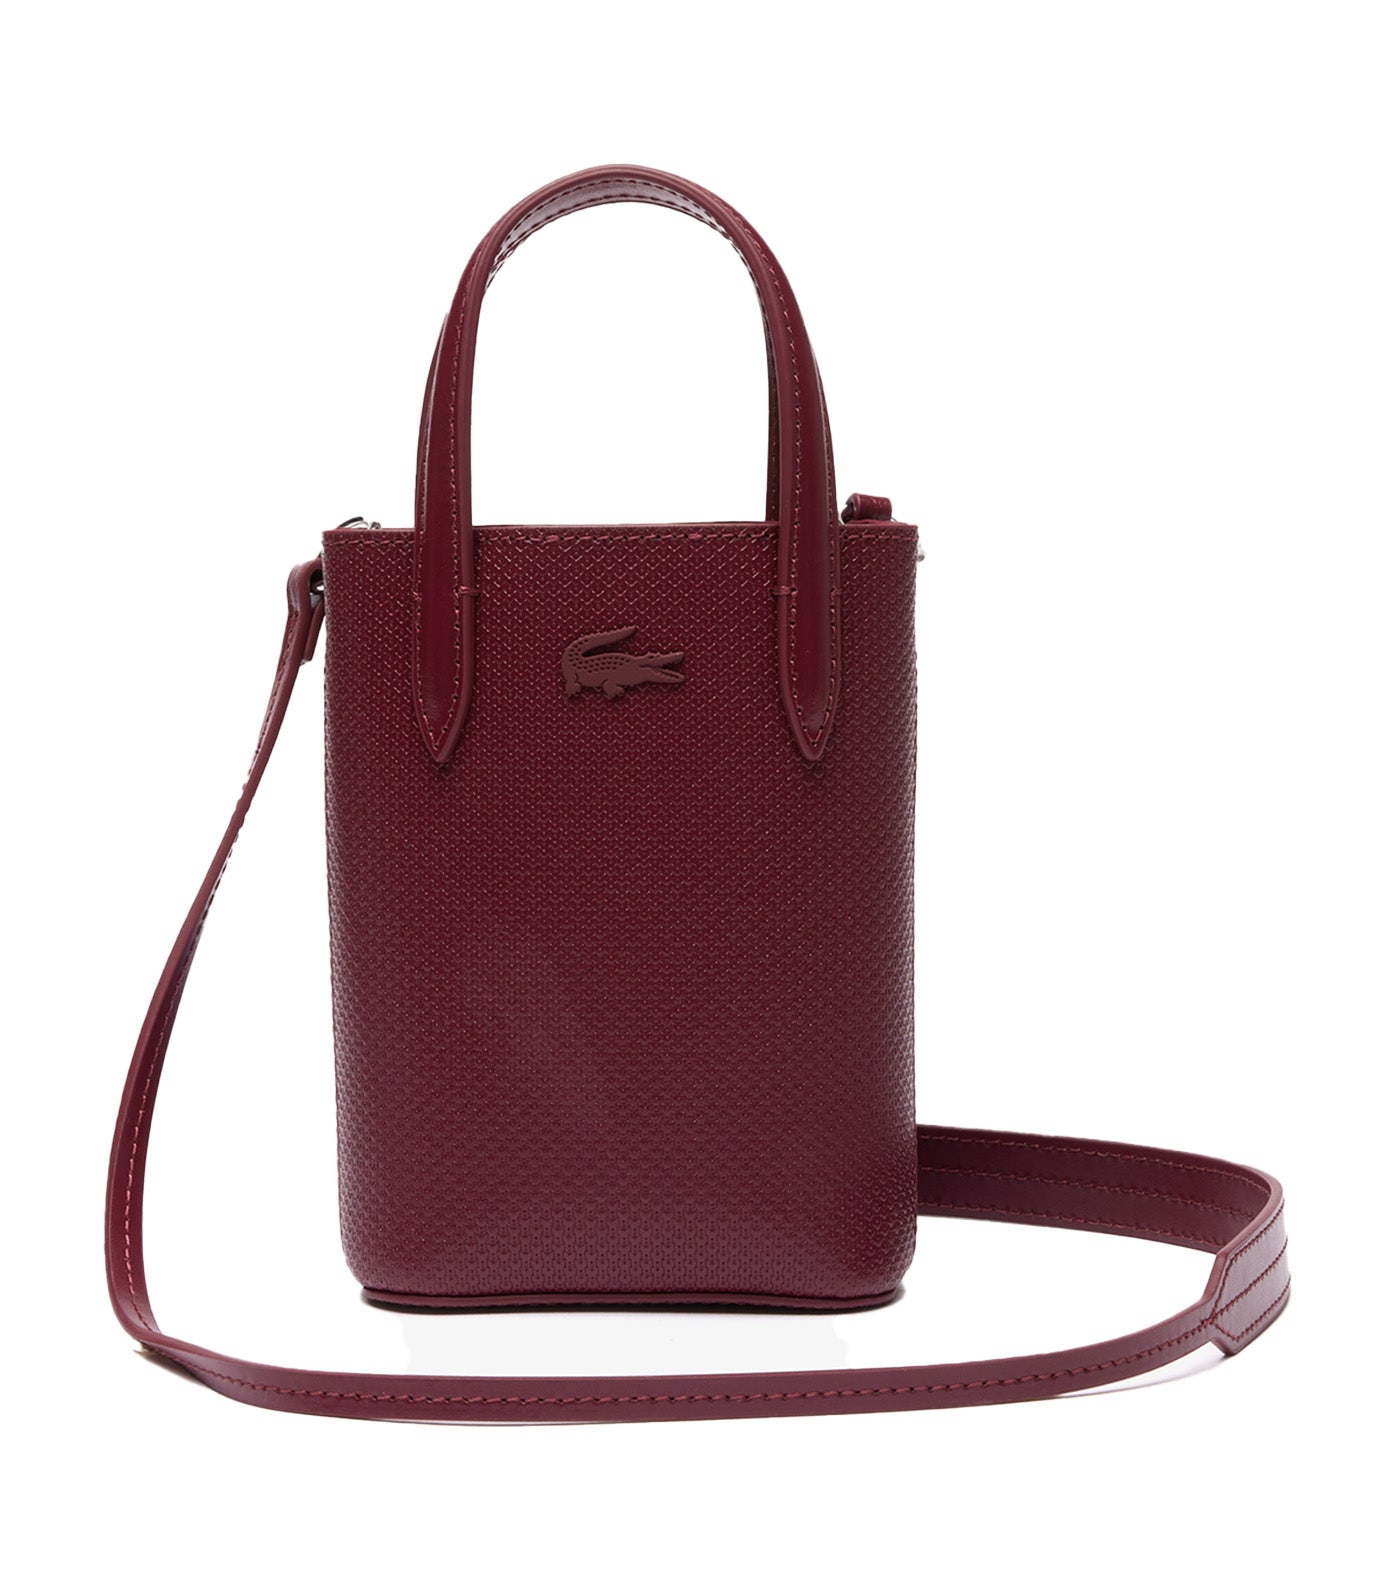 Buy Lacoste Women's Lora Small Leather Purse (Sinople) at Amazon.in